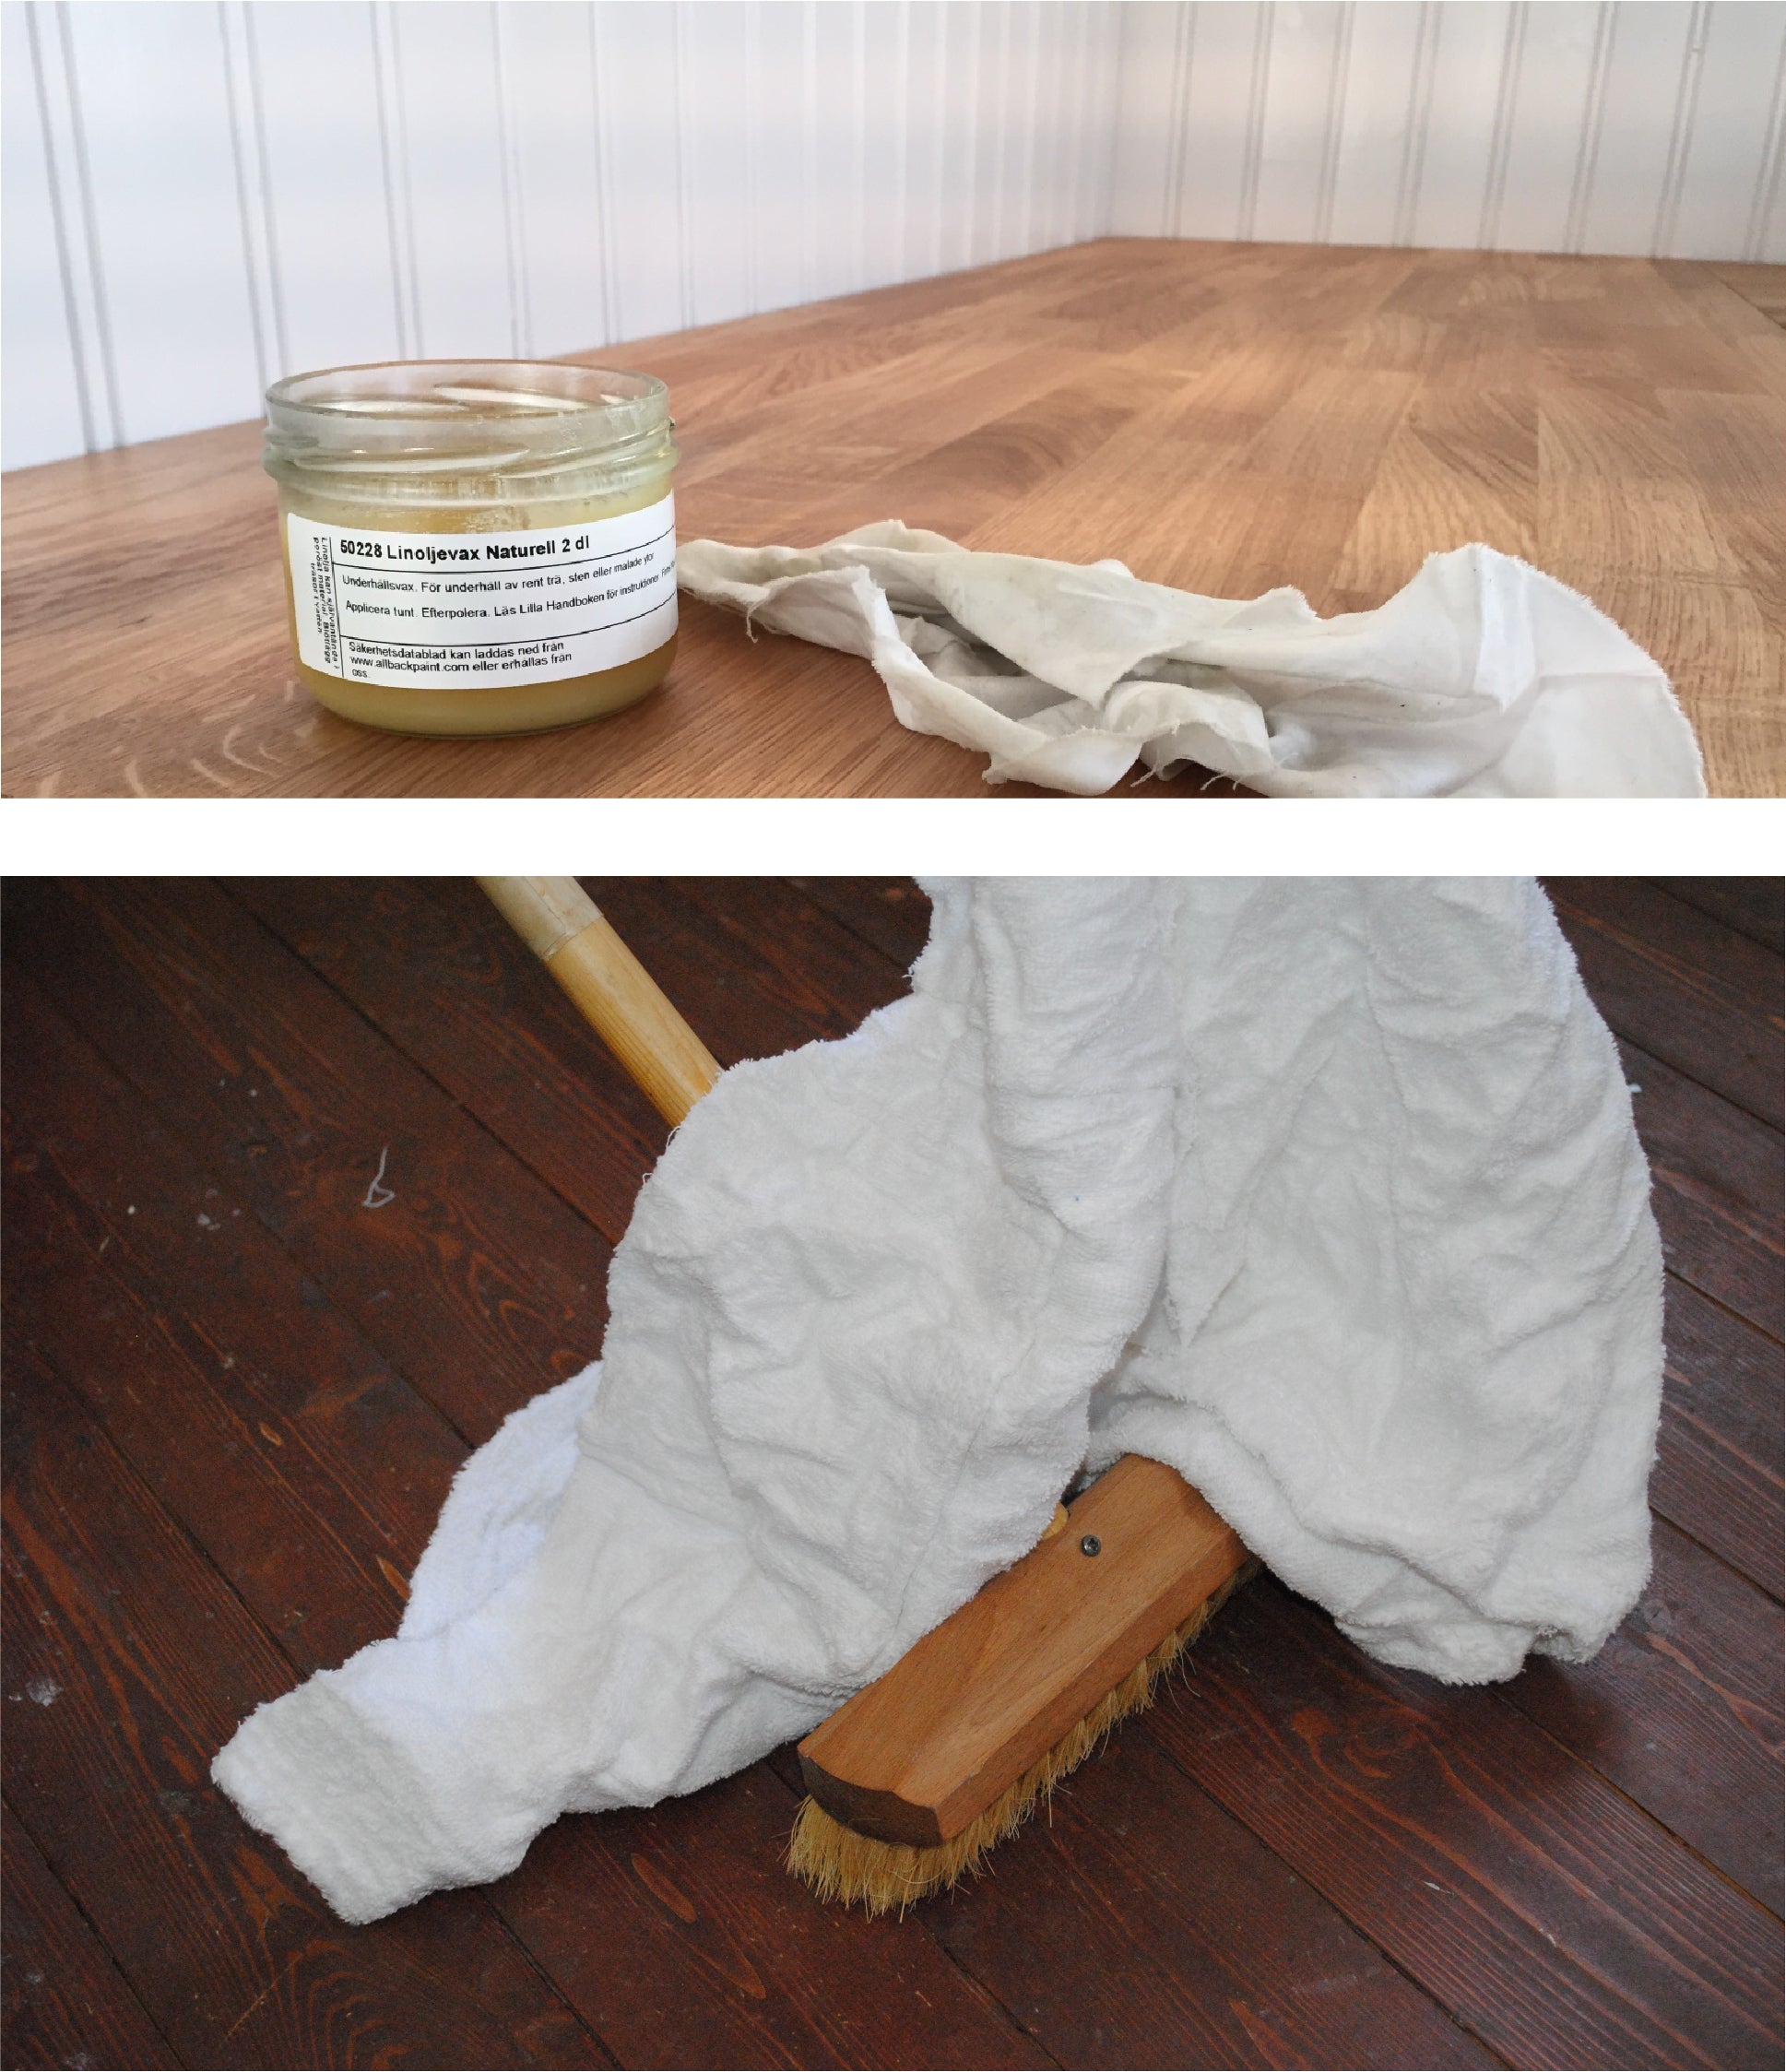 Linseed Oil Wax for counters or floors.